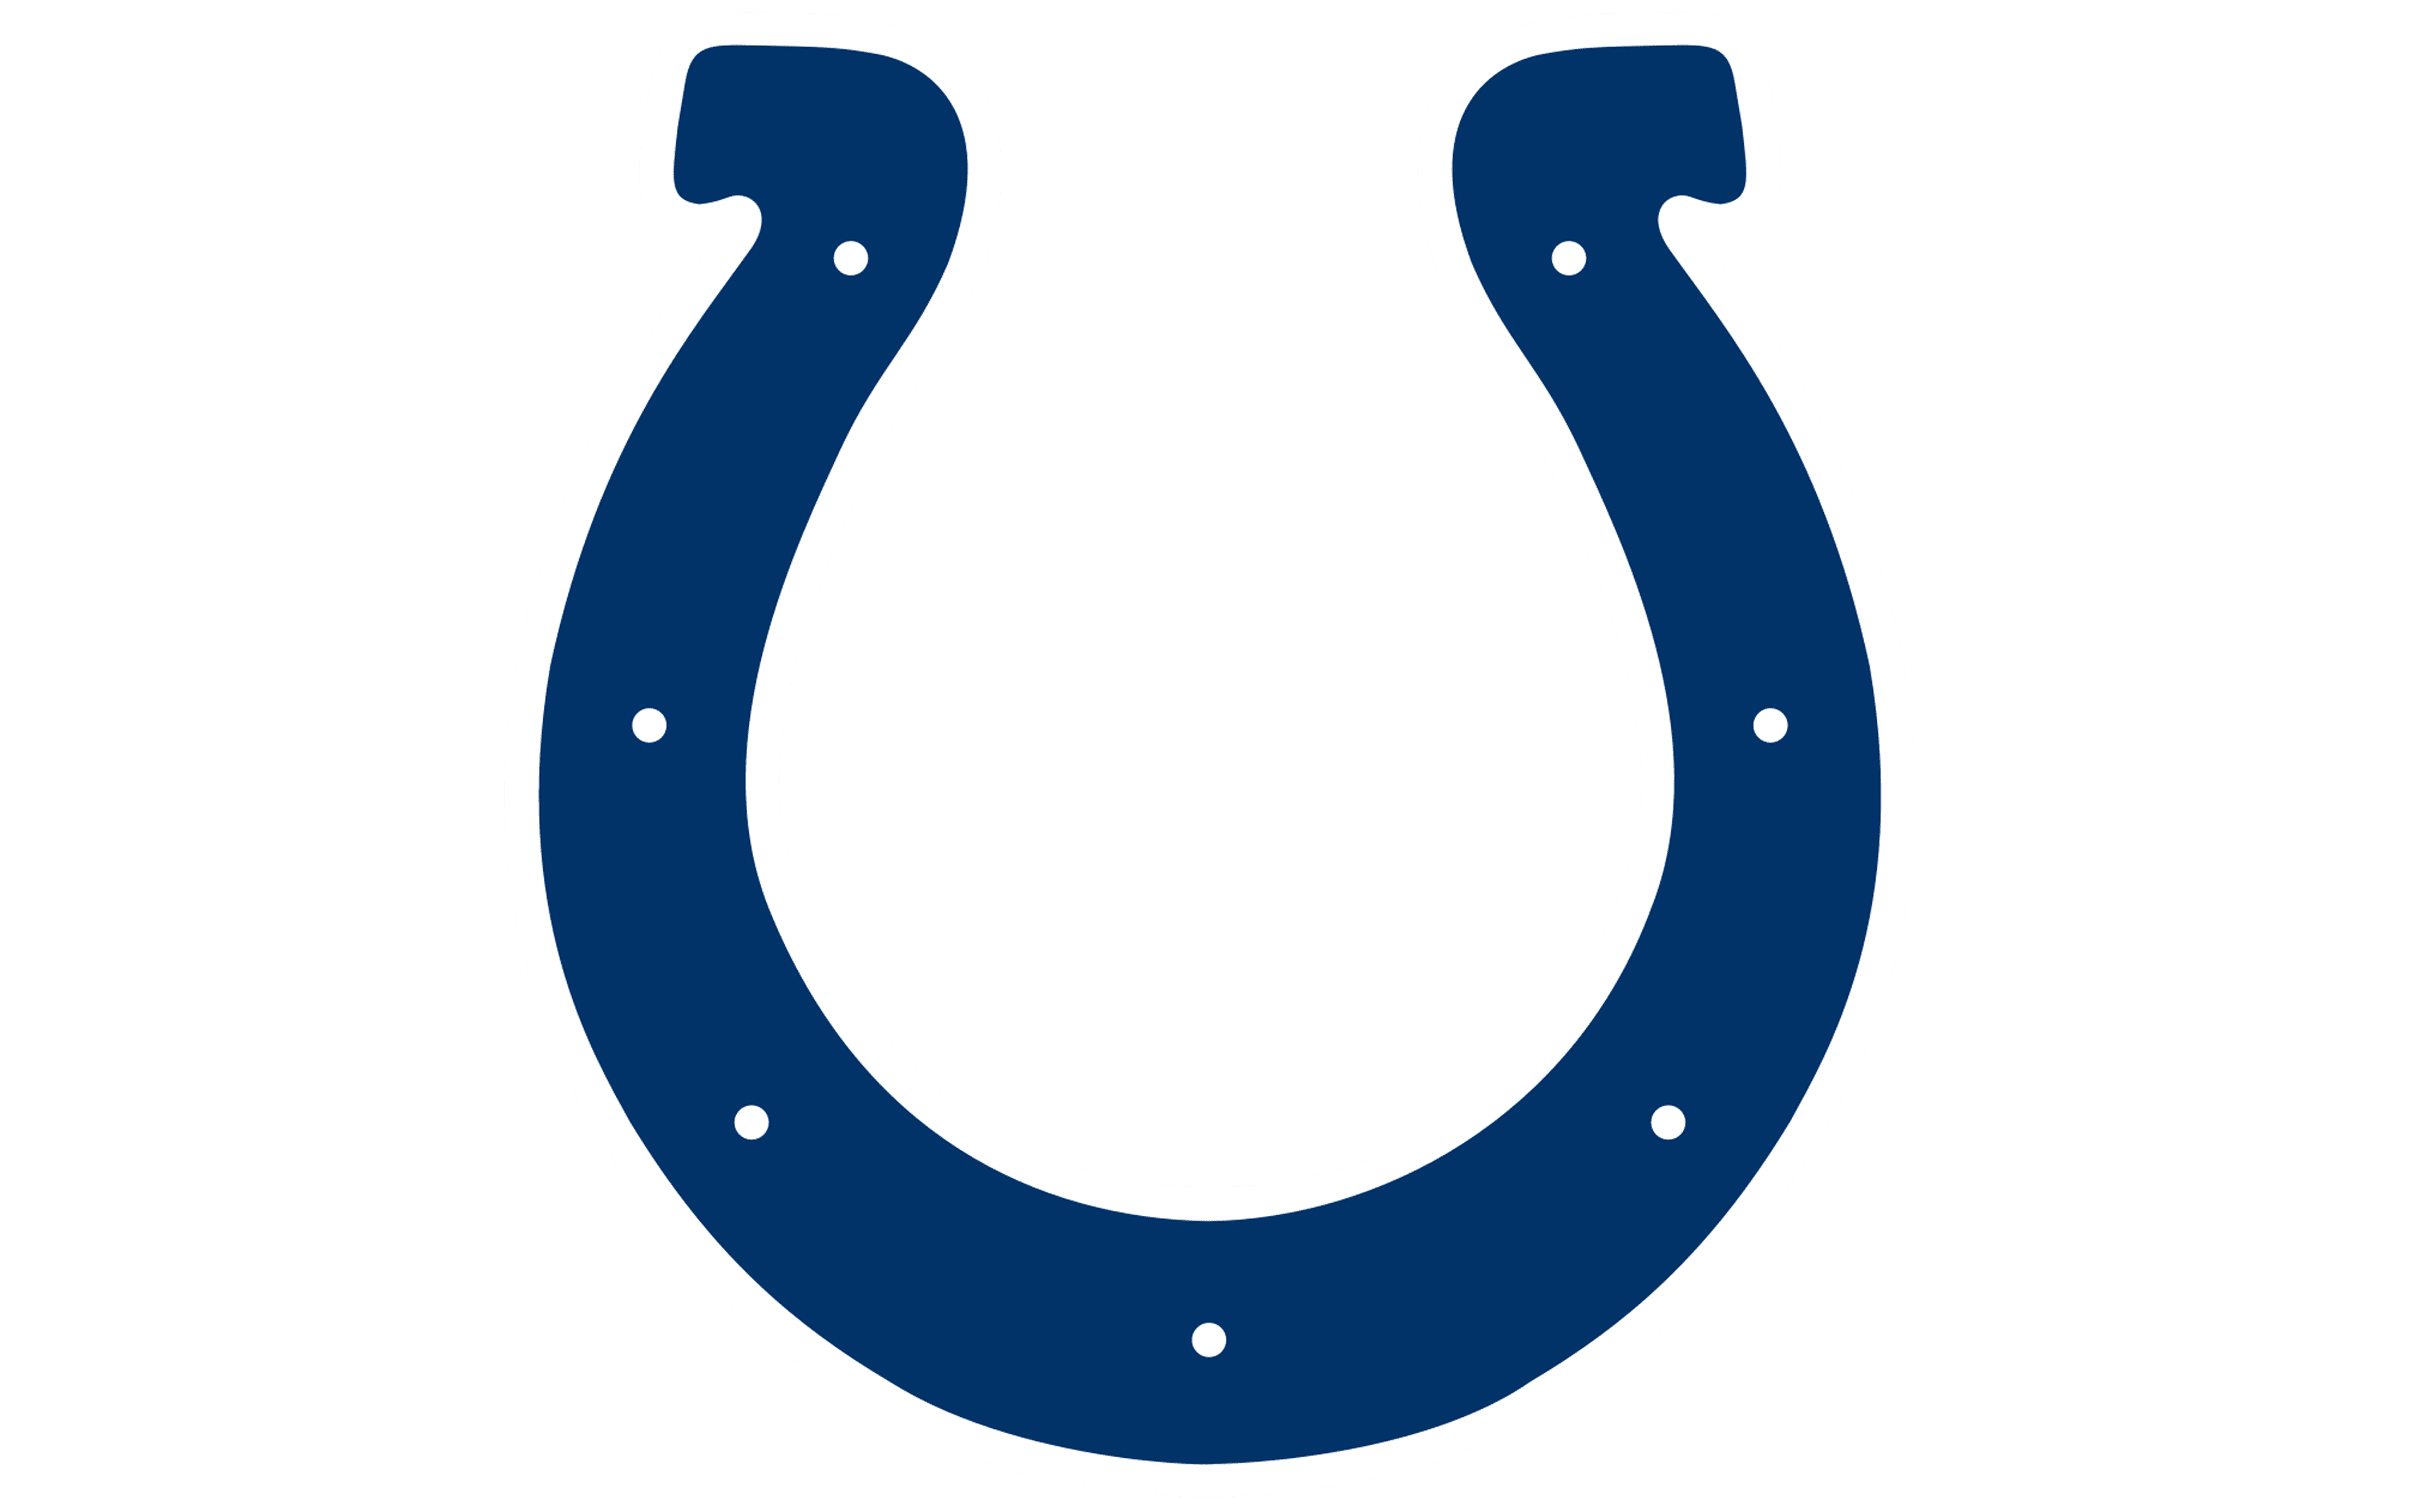 Indianapolis Colts 